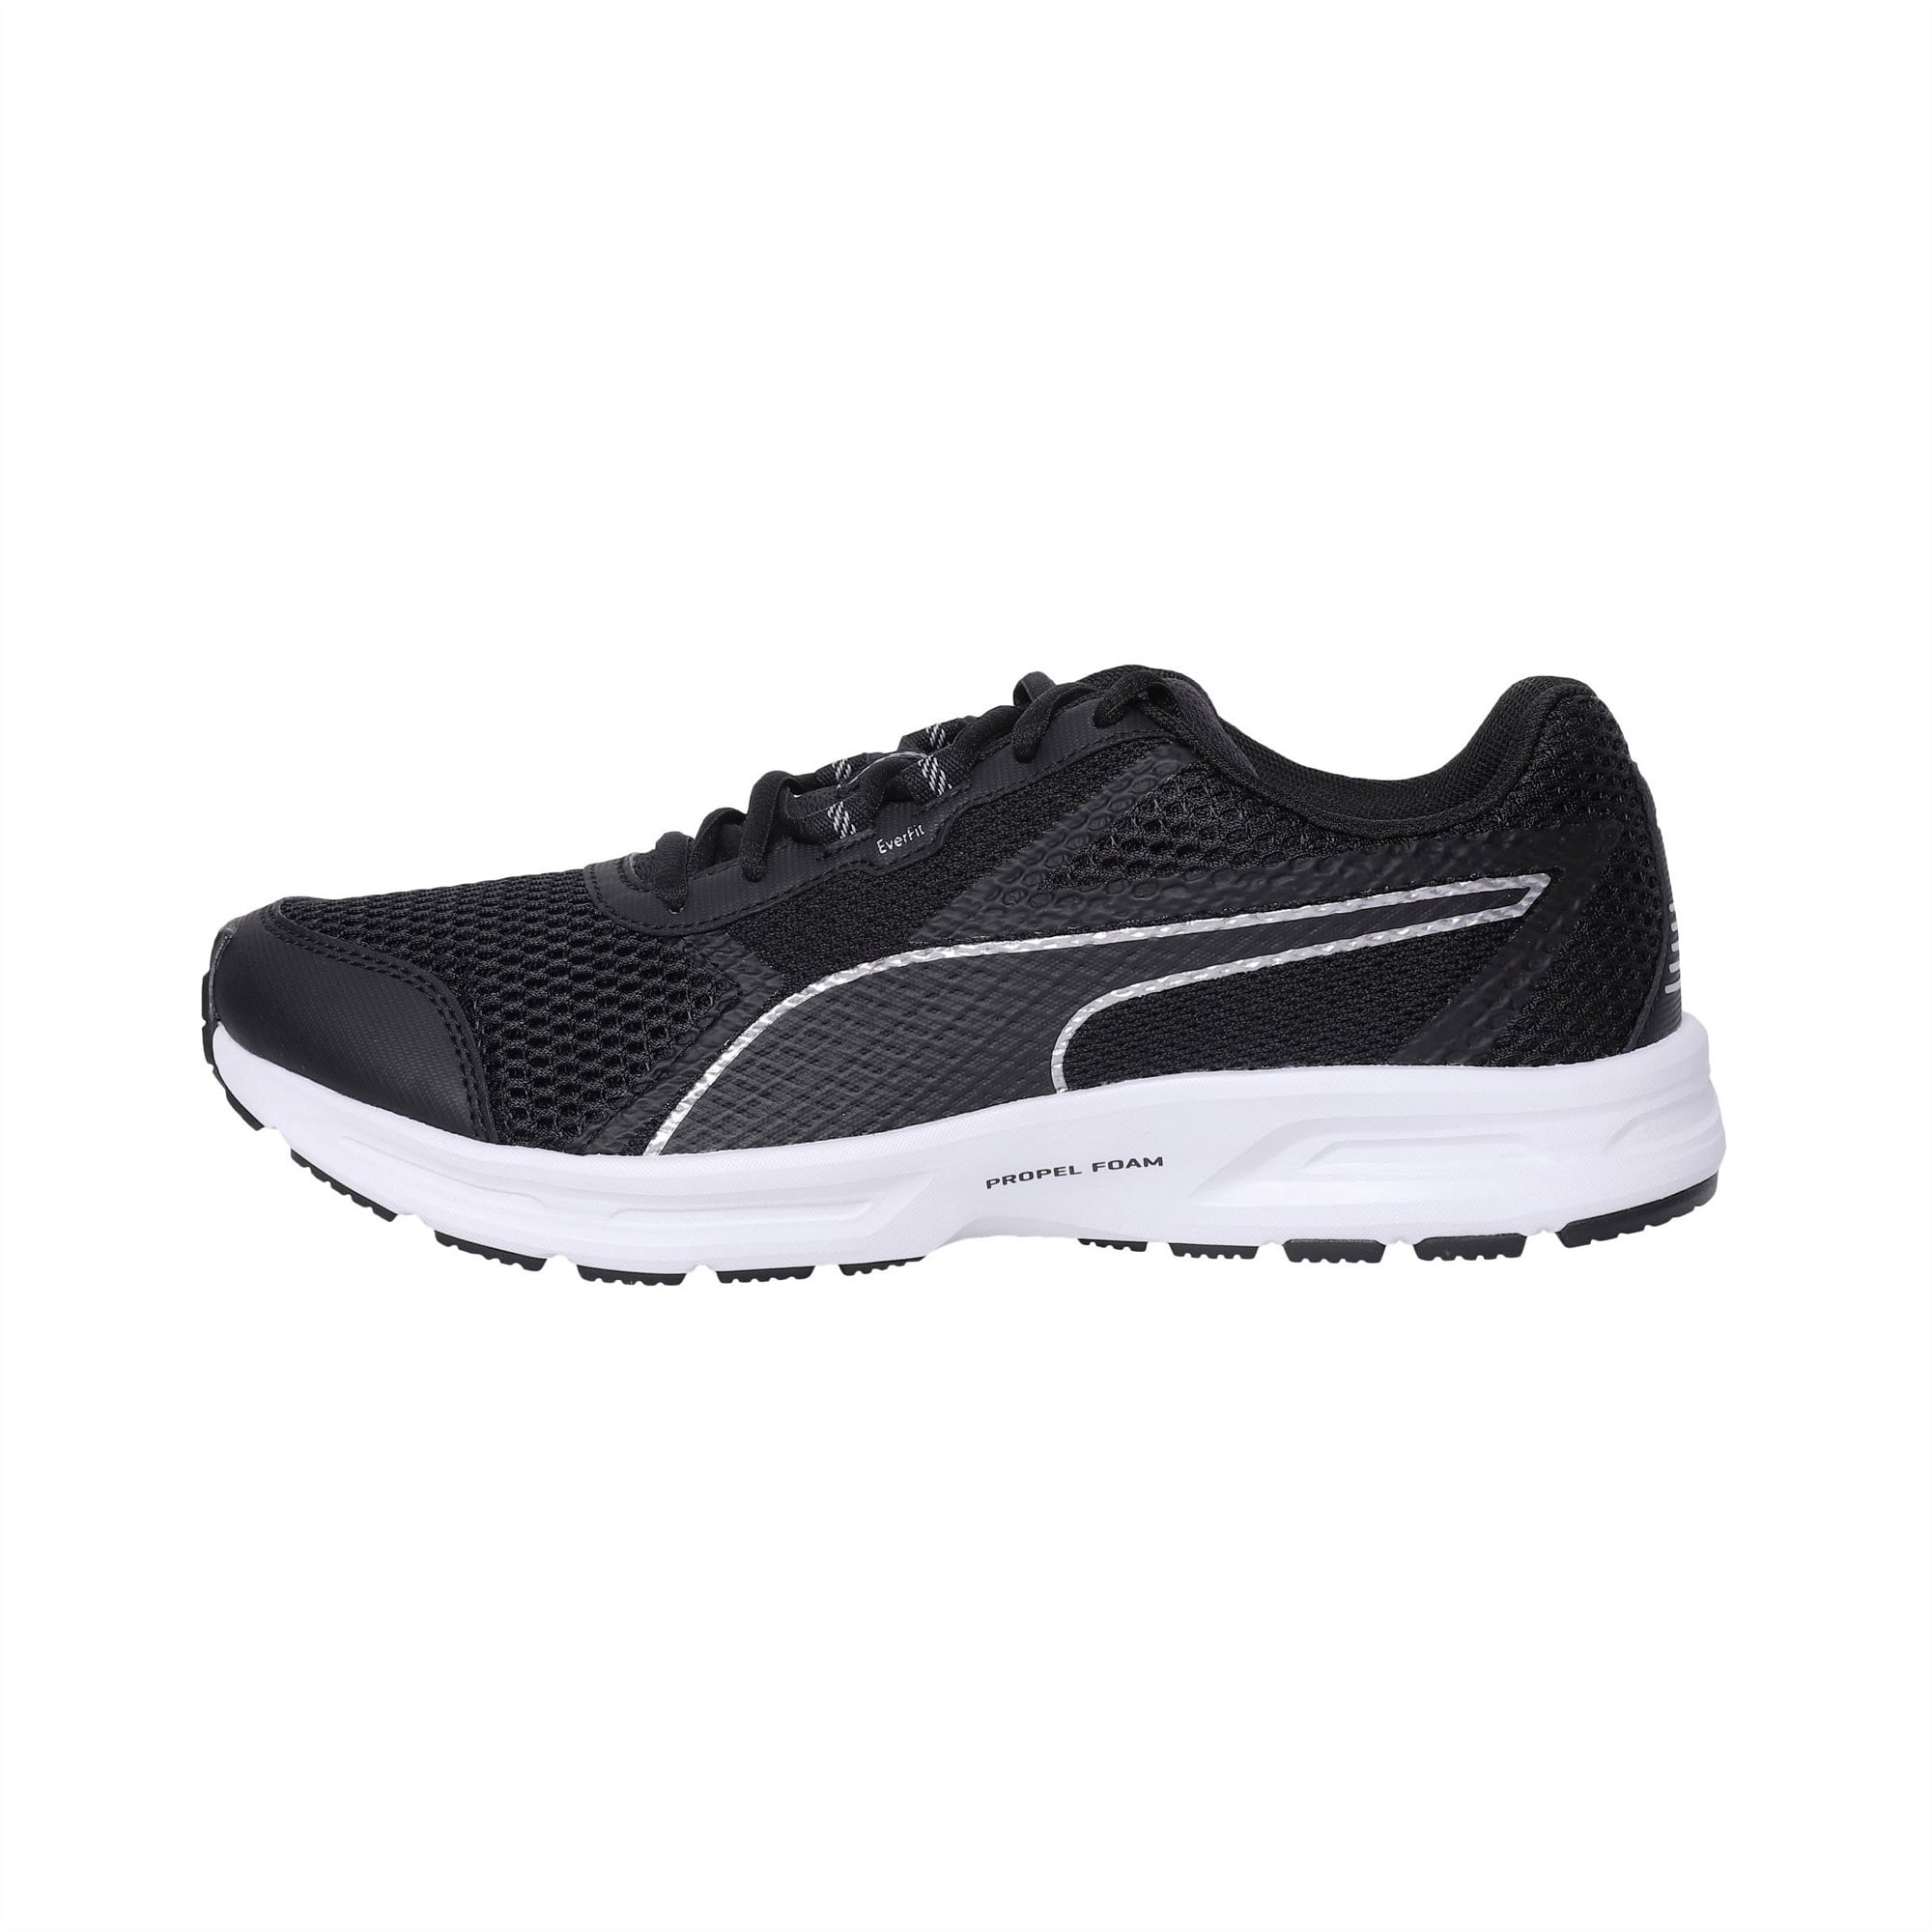 puma black and white running shoes